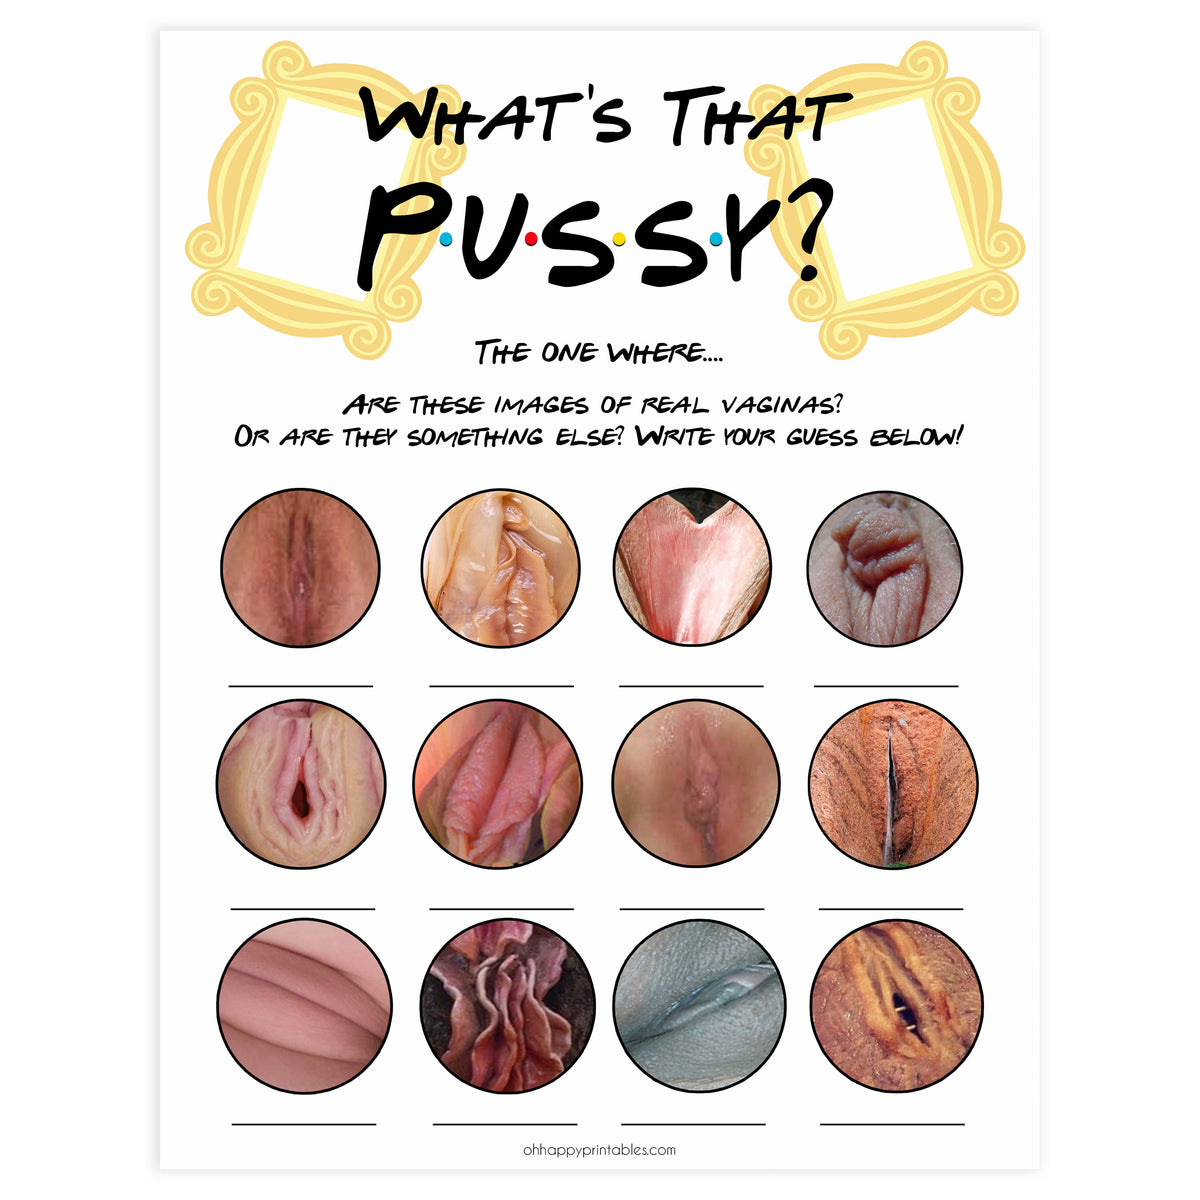 whats that pussy game, guess the vagina game, Printable bachelorette games, friends bachelorette, friends hen party games, fun hen party games, bachelorette game ideas, friends adult party games, naughty hen games, naughty bachelorette games